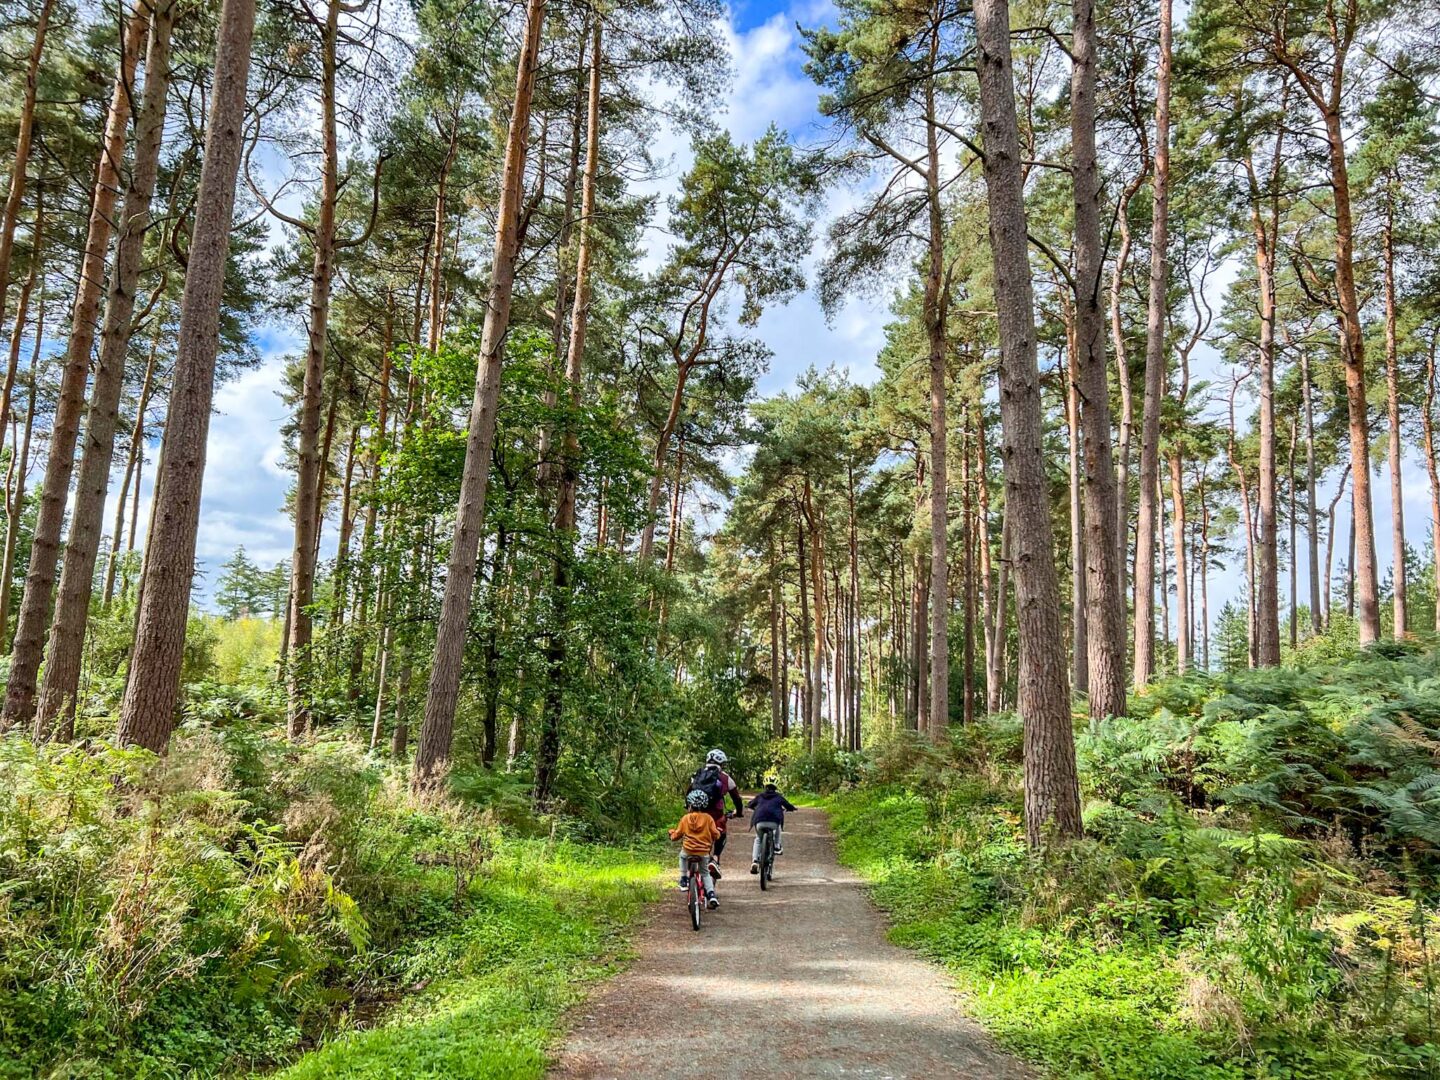 The Wandering Quinn Travel Blog Family Days Out Near Manchester, Family bike riding at Delamere Forest